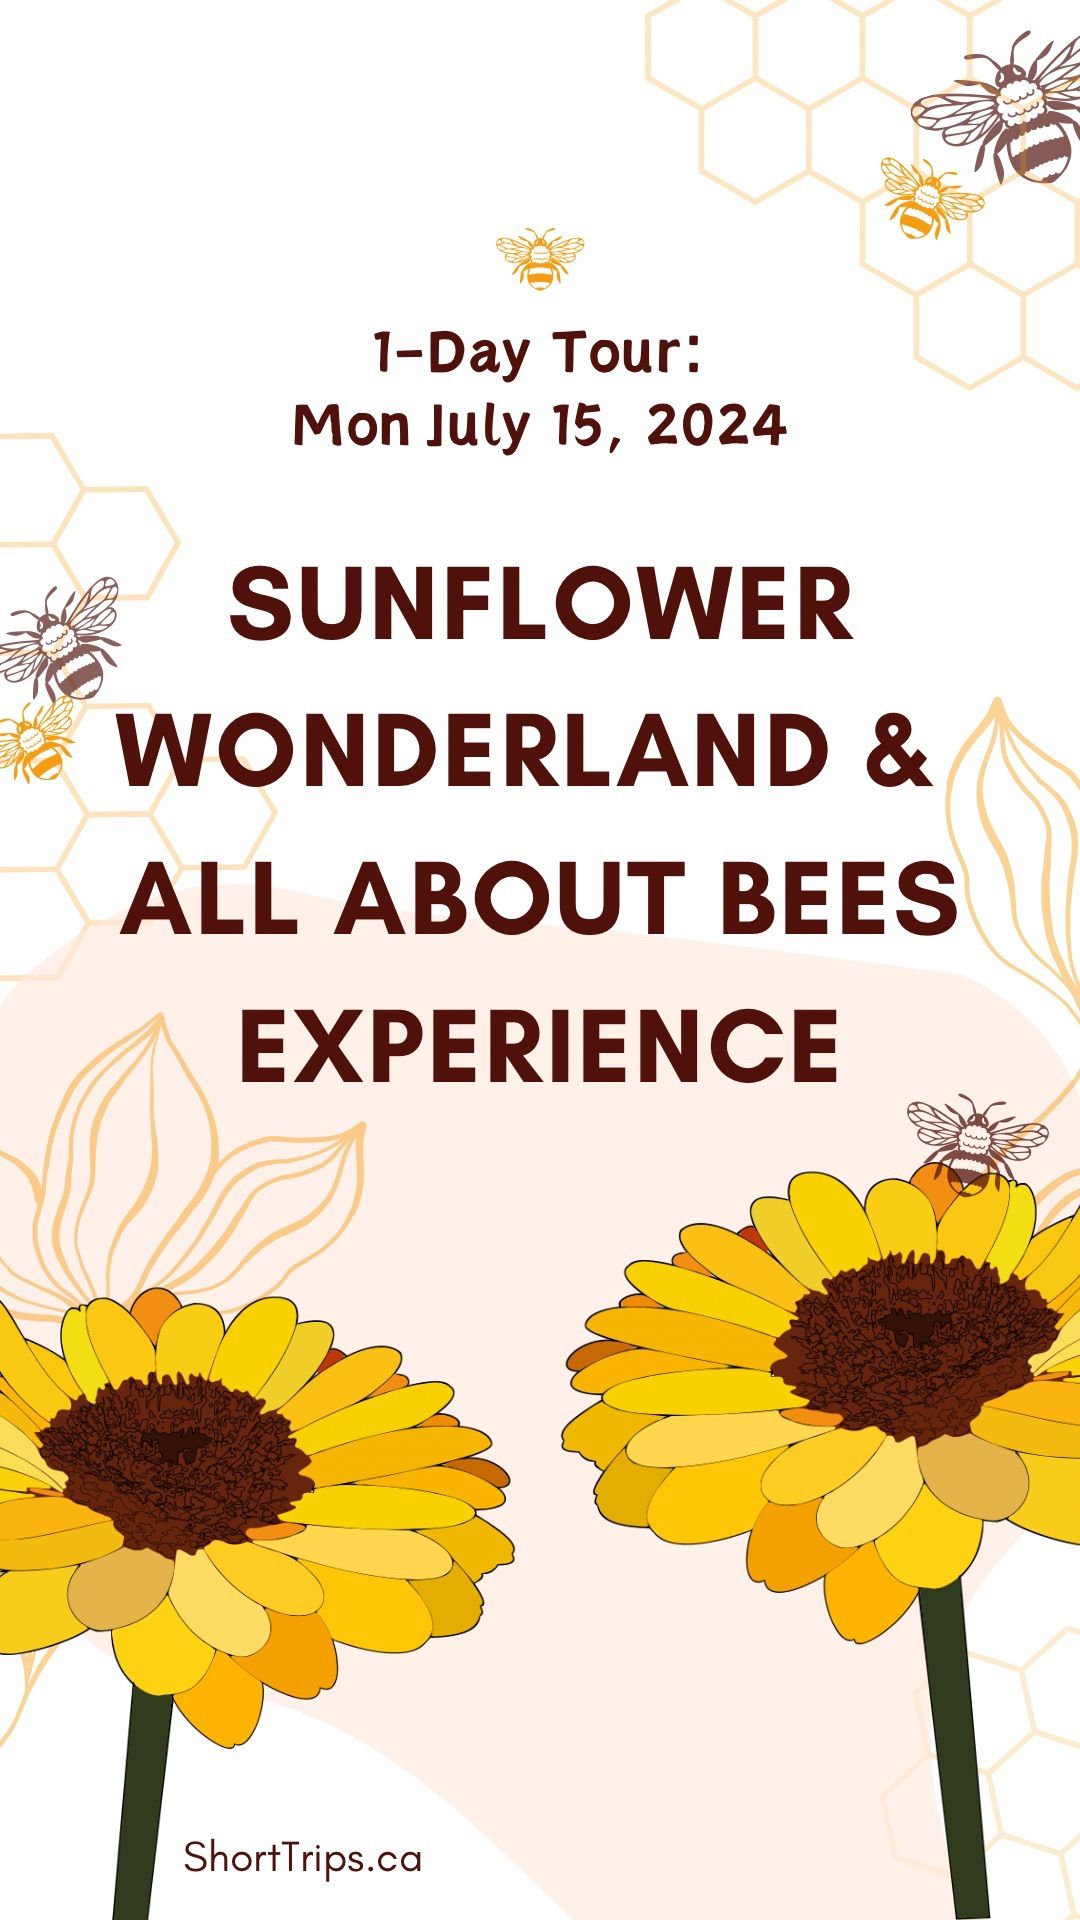 Sunflower Wonderland & All About Bees Experience